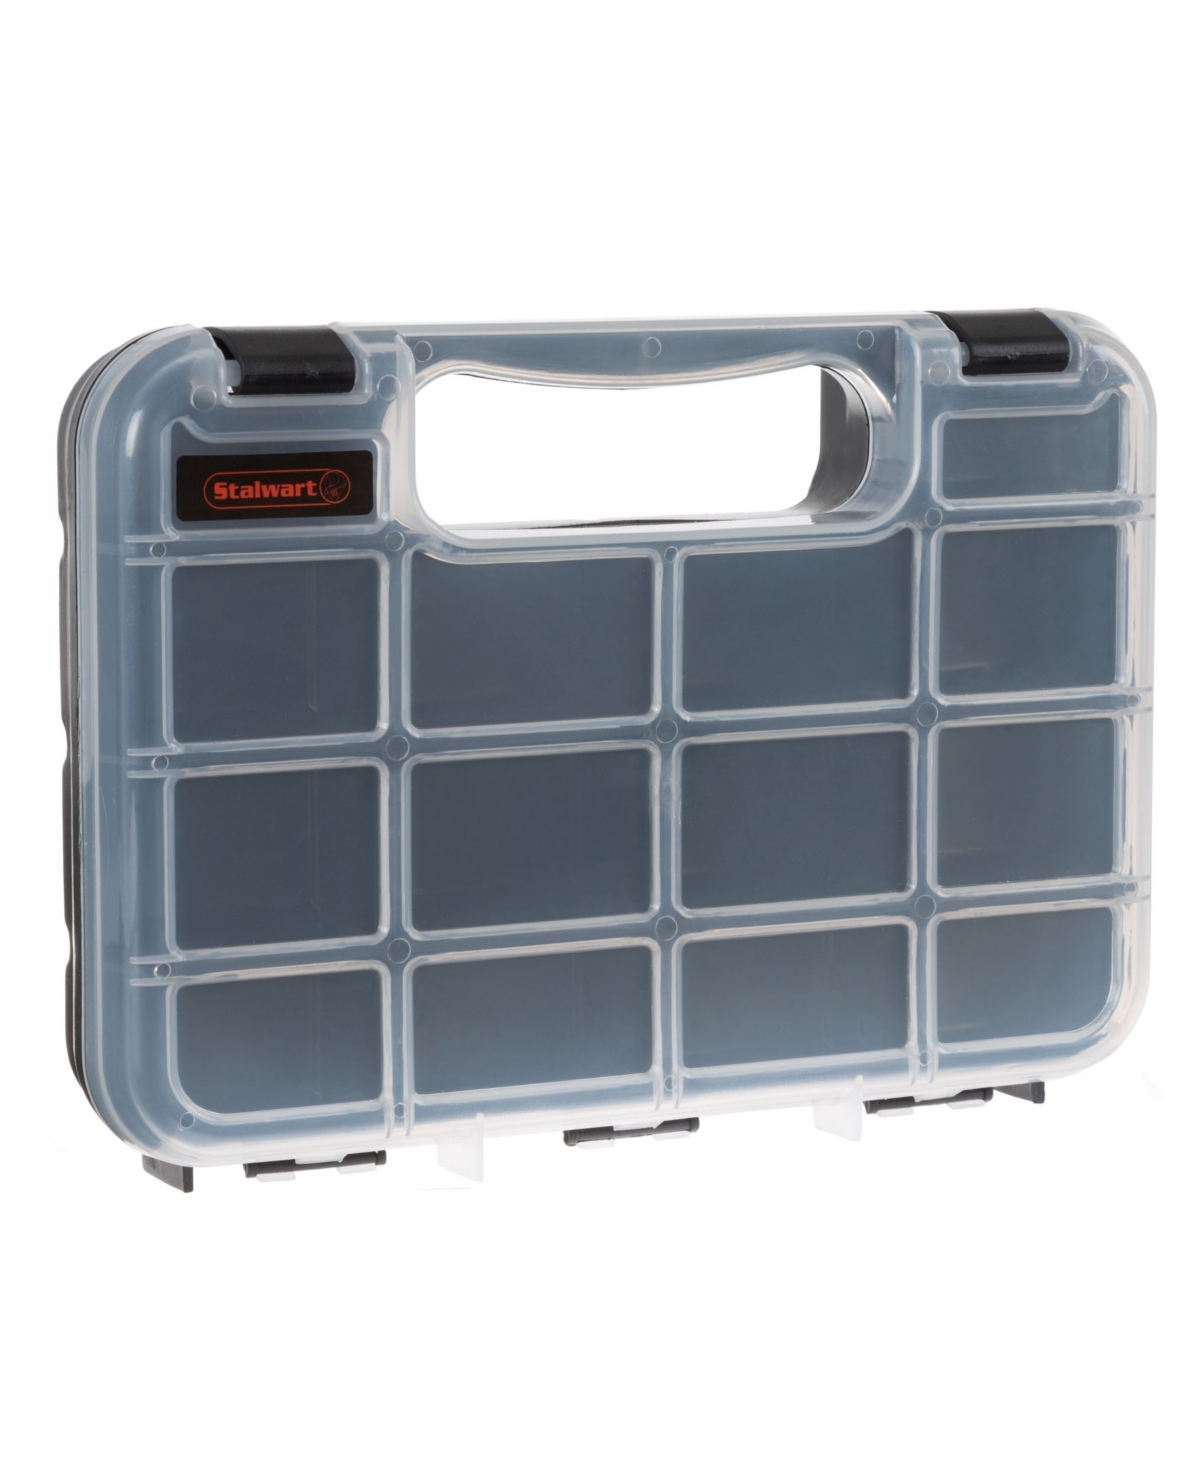 Portable Storage Case with Secure Locks and 14 Small Bin Compartments by Stalwart - Black